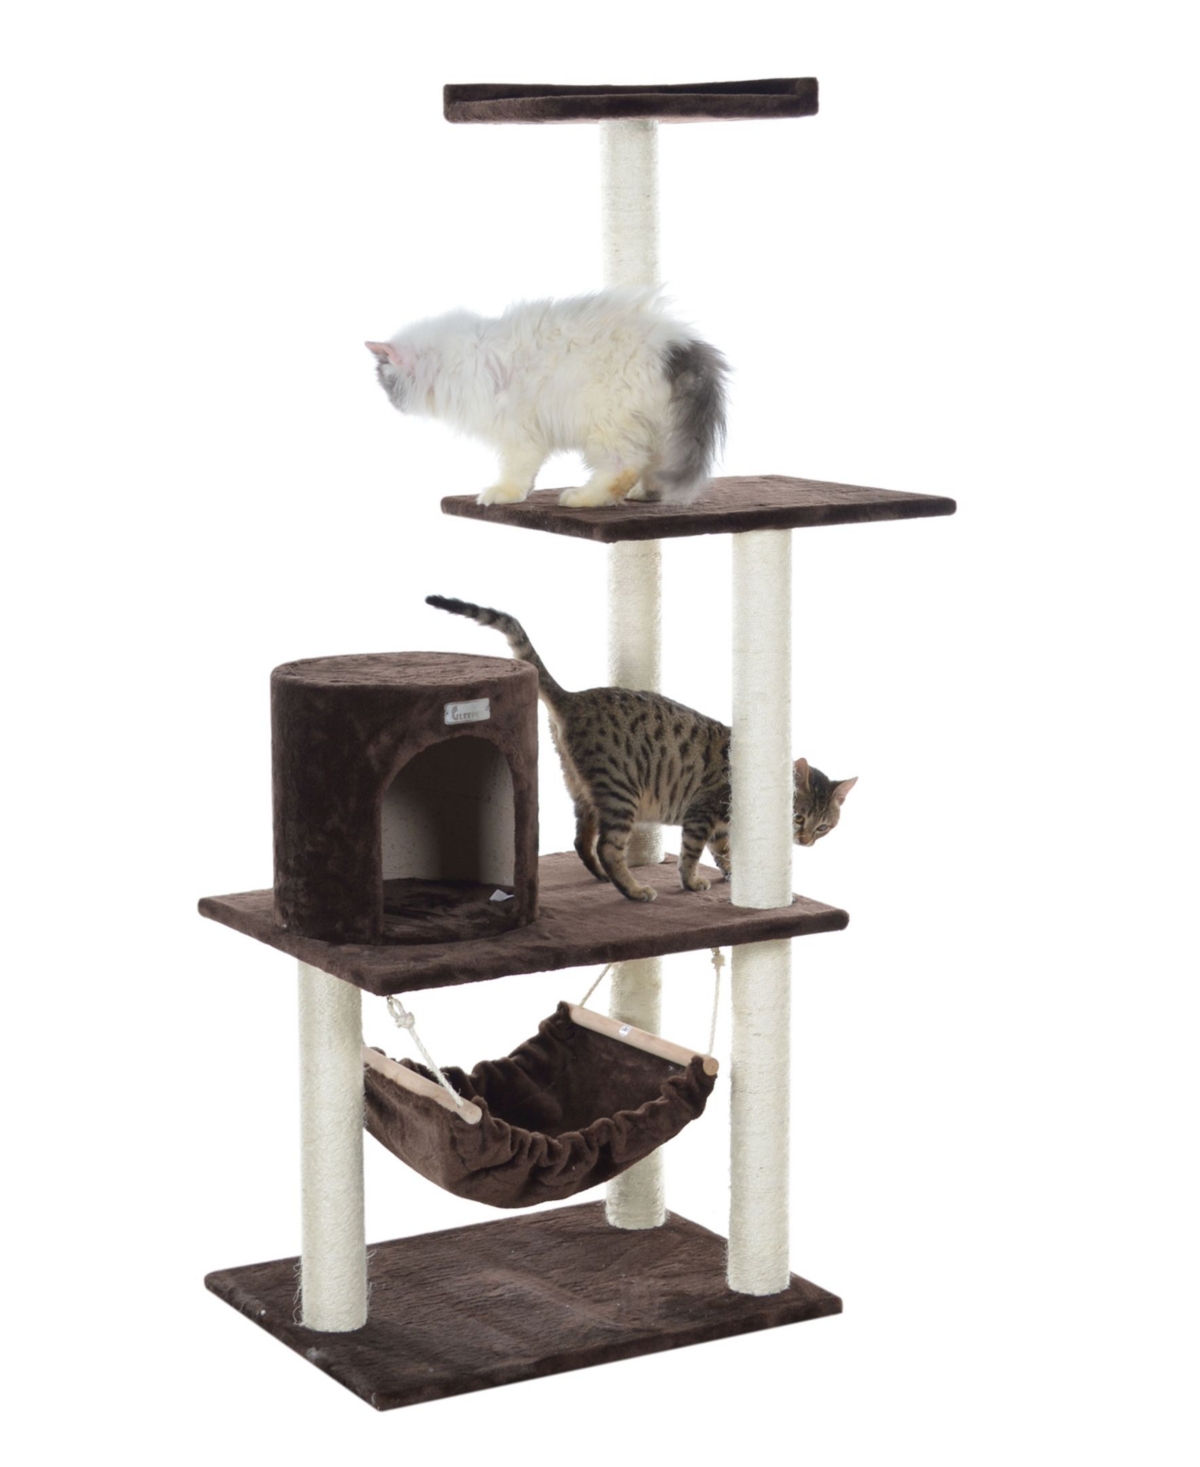 59-Inch Real Wood Cat Tree With Condo & Hammock - Coffee Brown